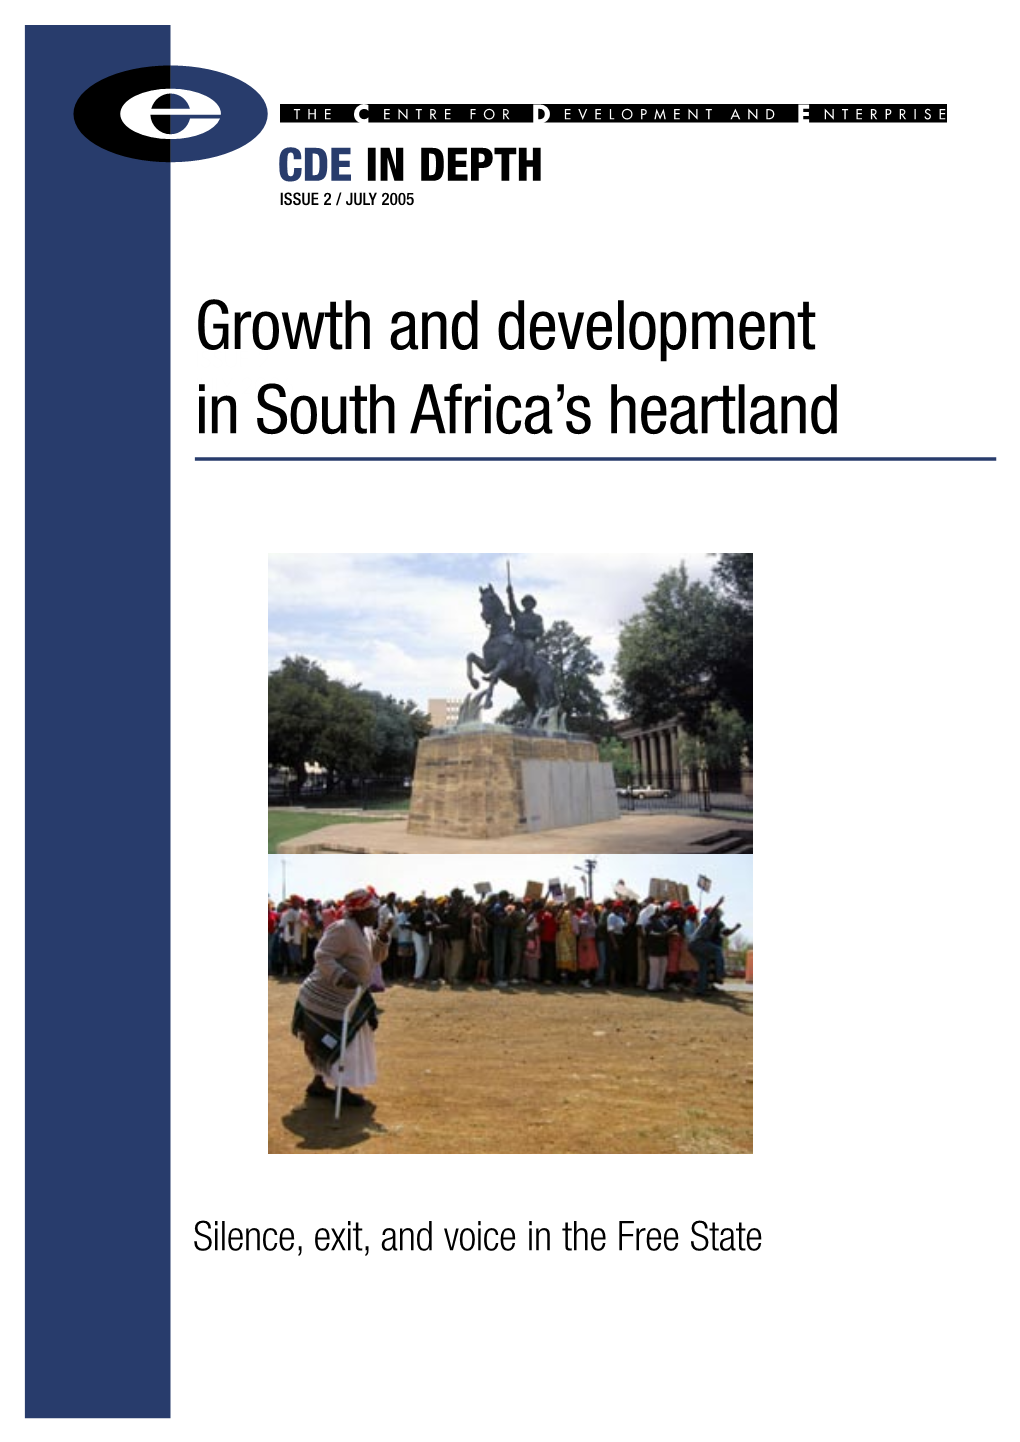 Growth and Development in South Africa's Heartland